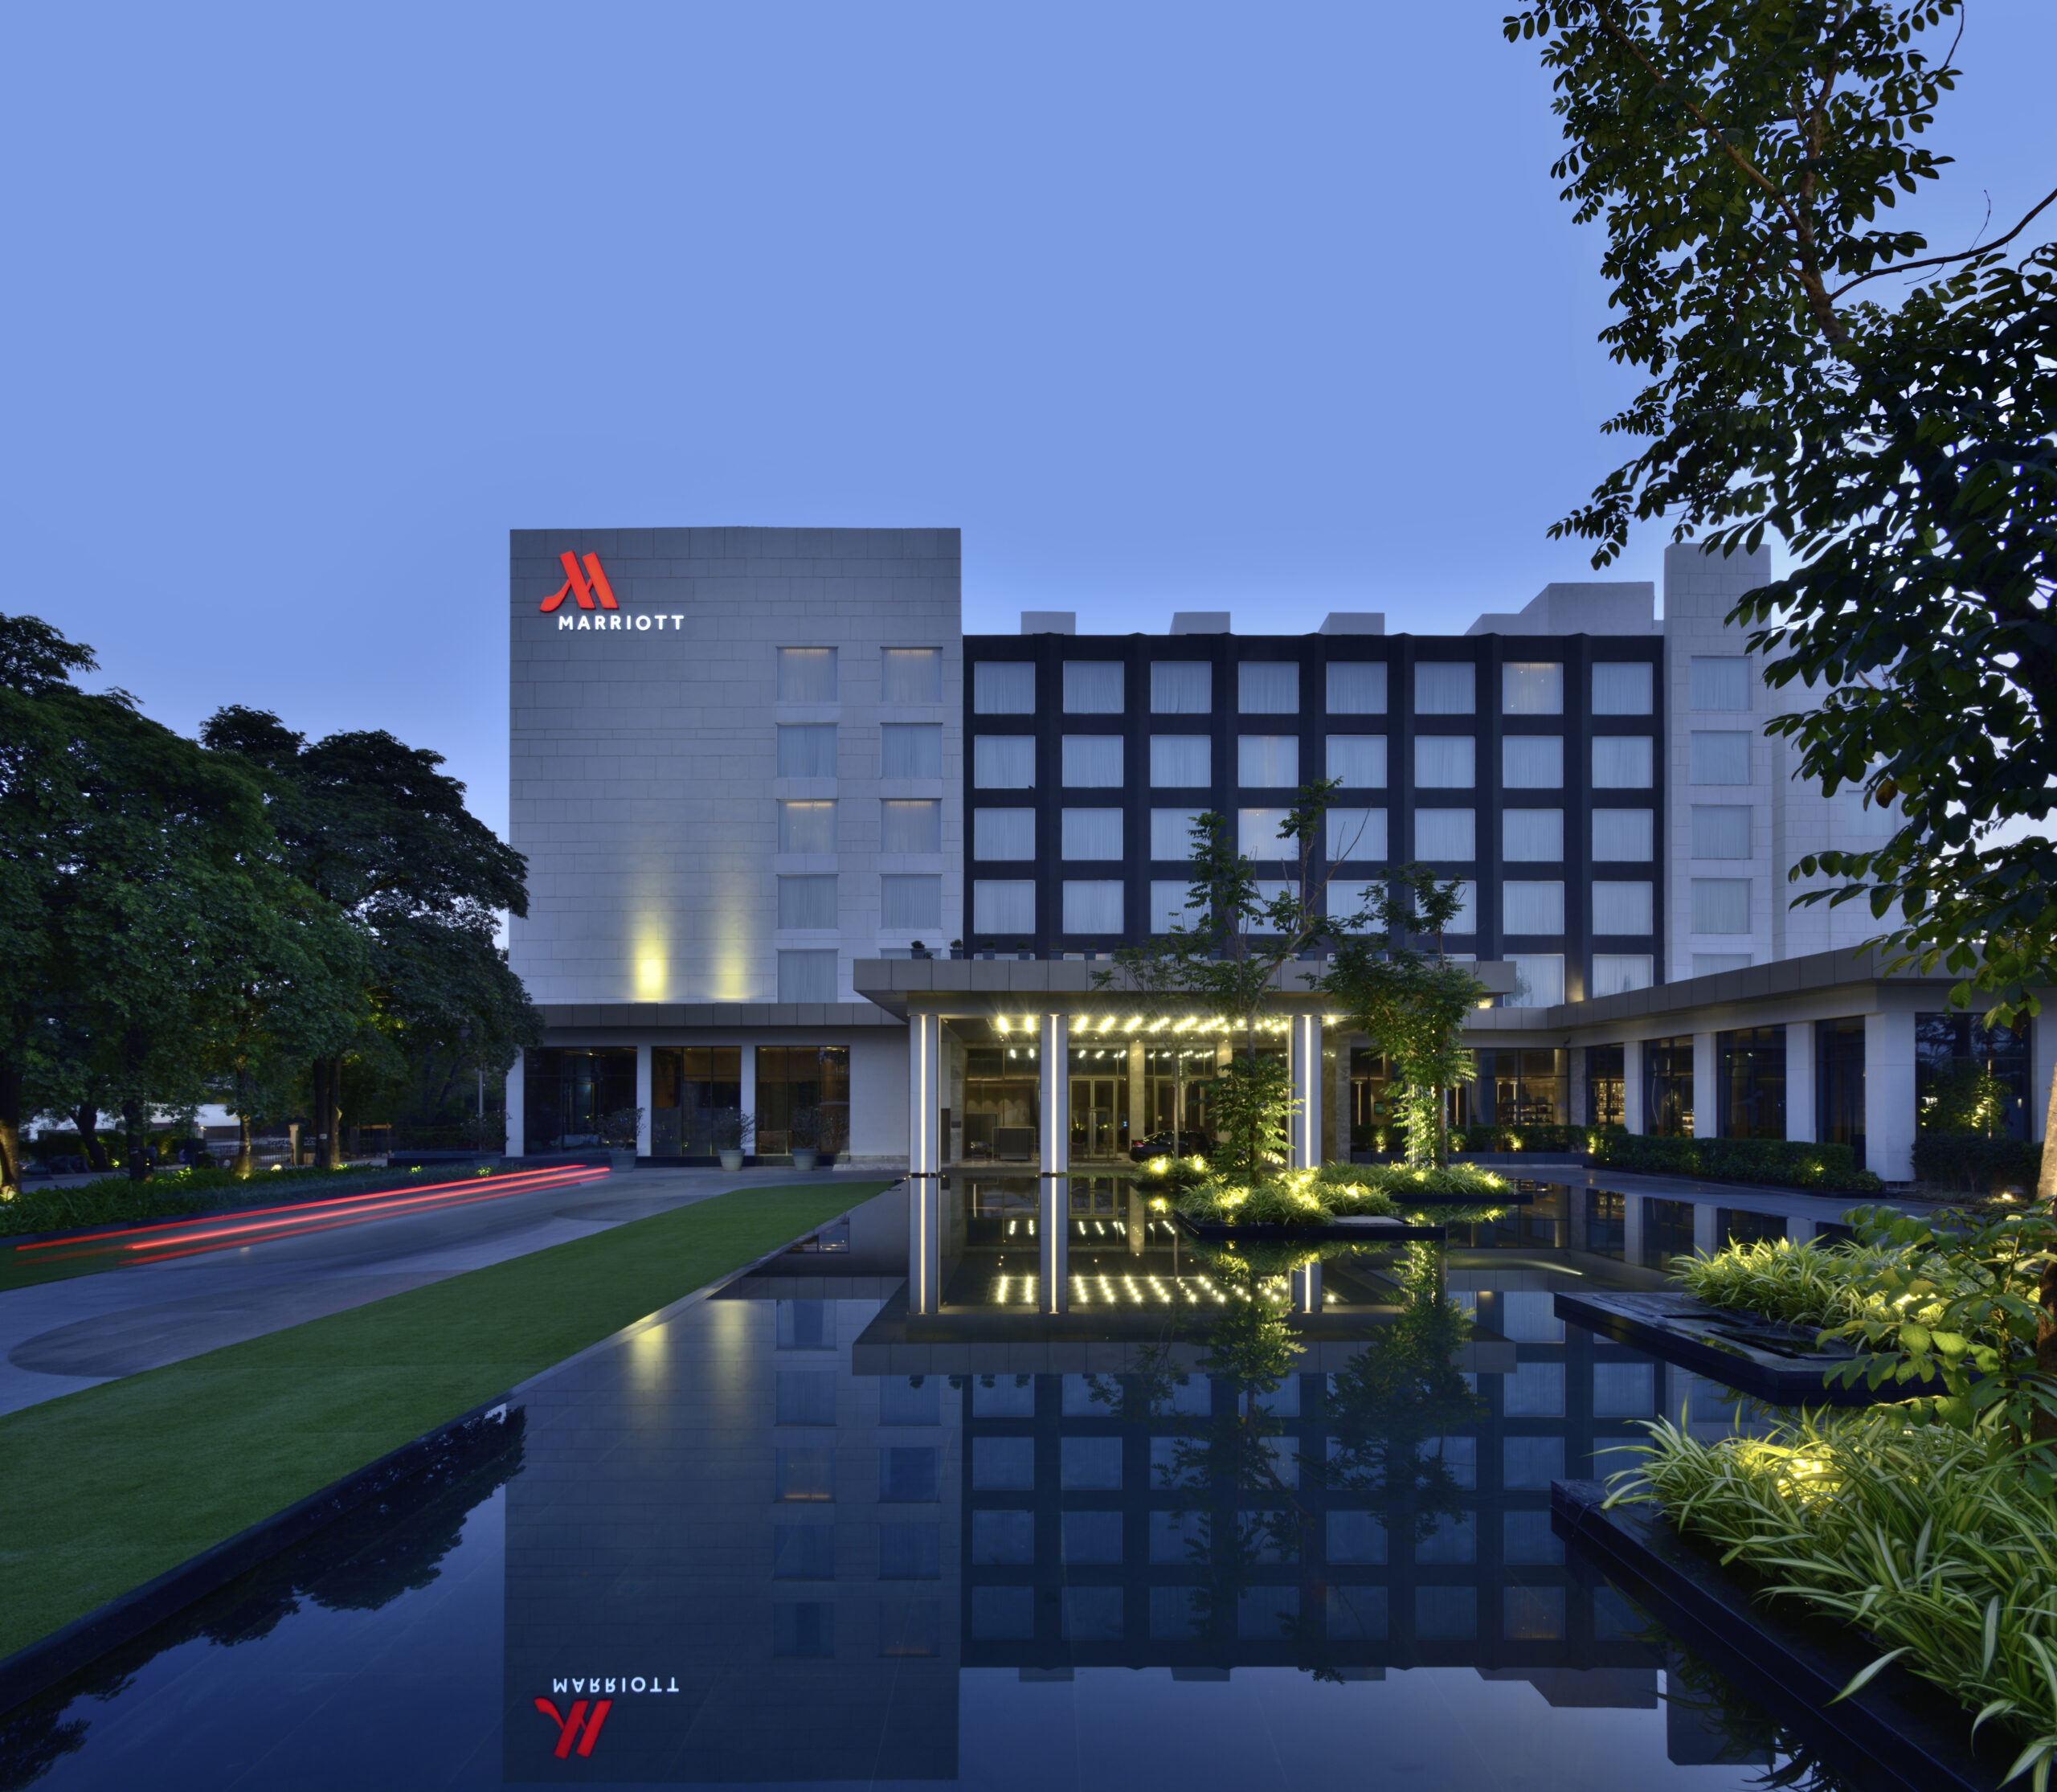 Marriott to open roughly two hotels per week in the Asia Pacific region in 2023